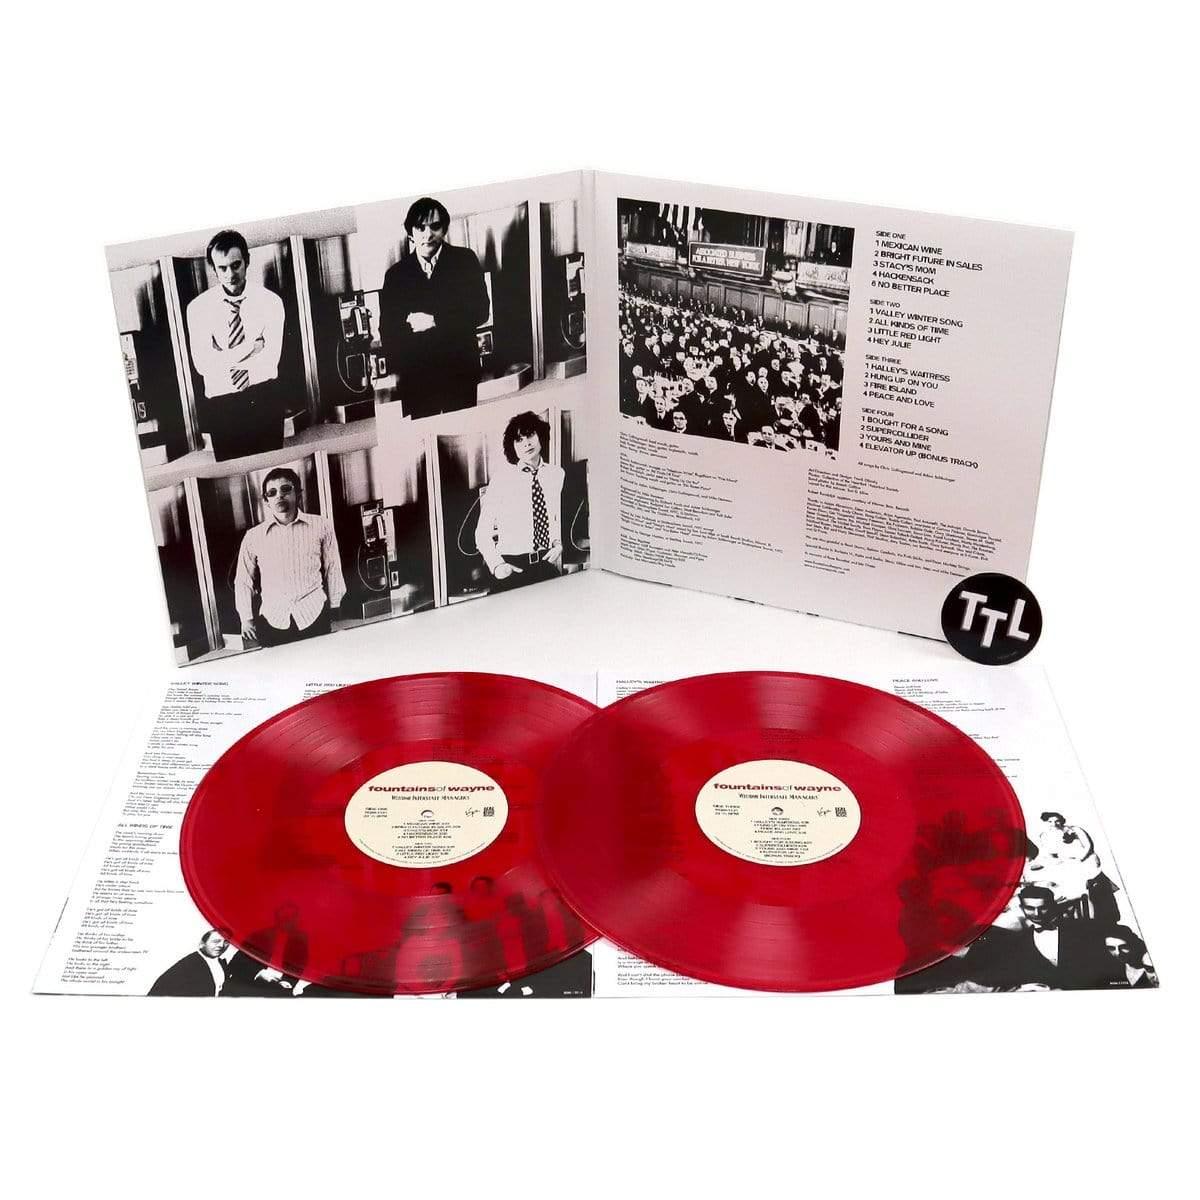 Fountains of Wayne - Welcome Interstate Managers (Limited Edition, Gatefold, Red Vinyl) (2 LP) - Joco Records